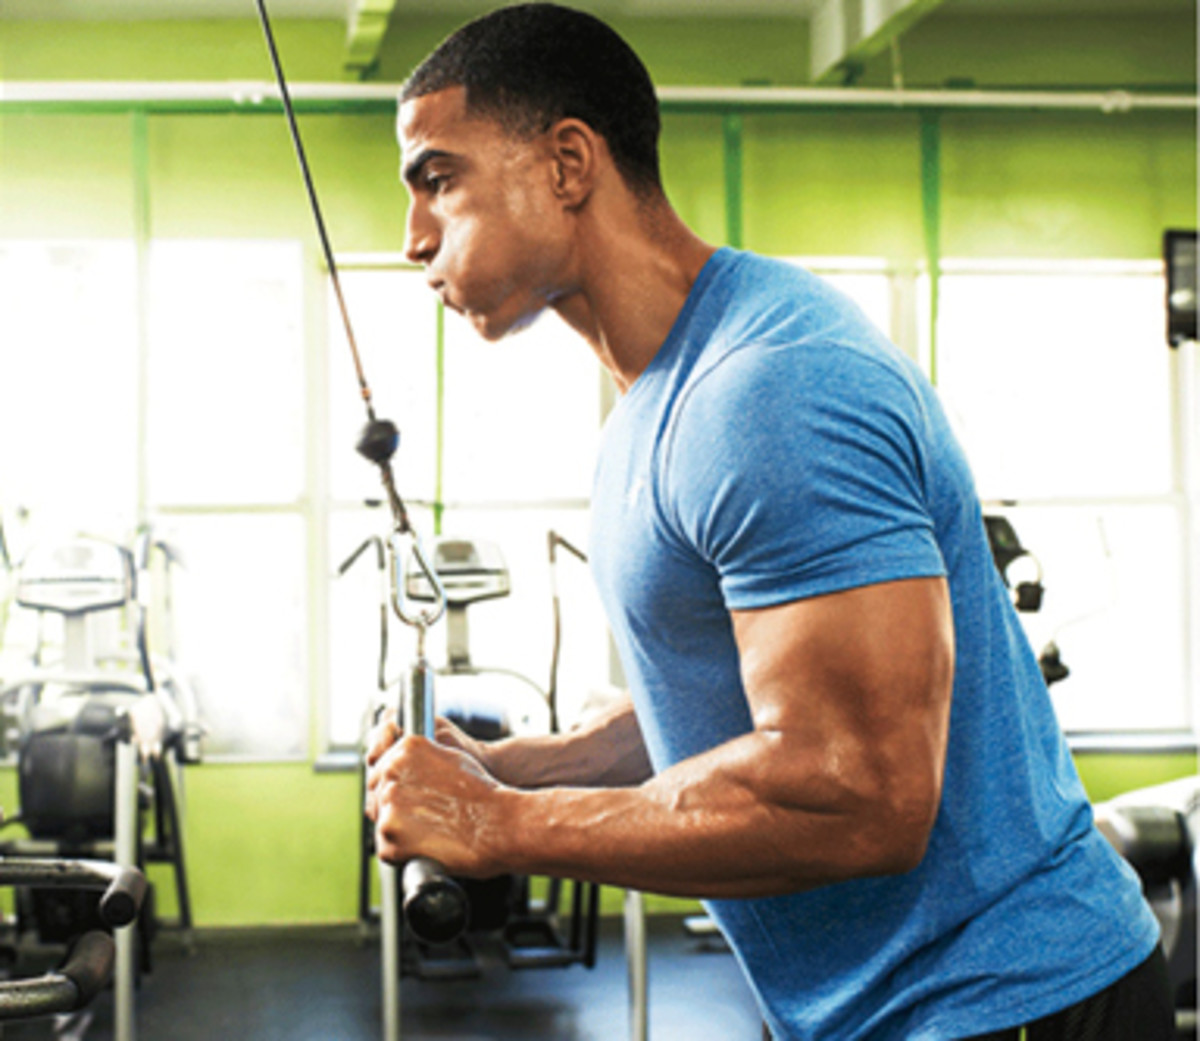 The Ultimate Guide To Arm Workouts - Muscle & Fitness